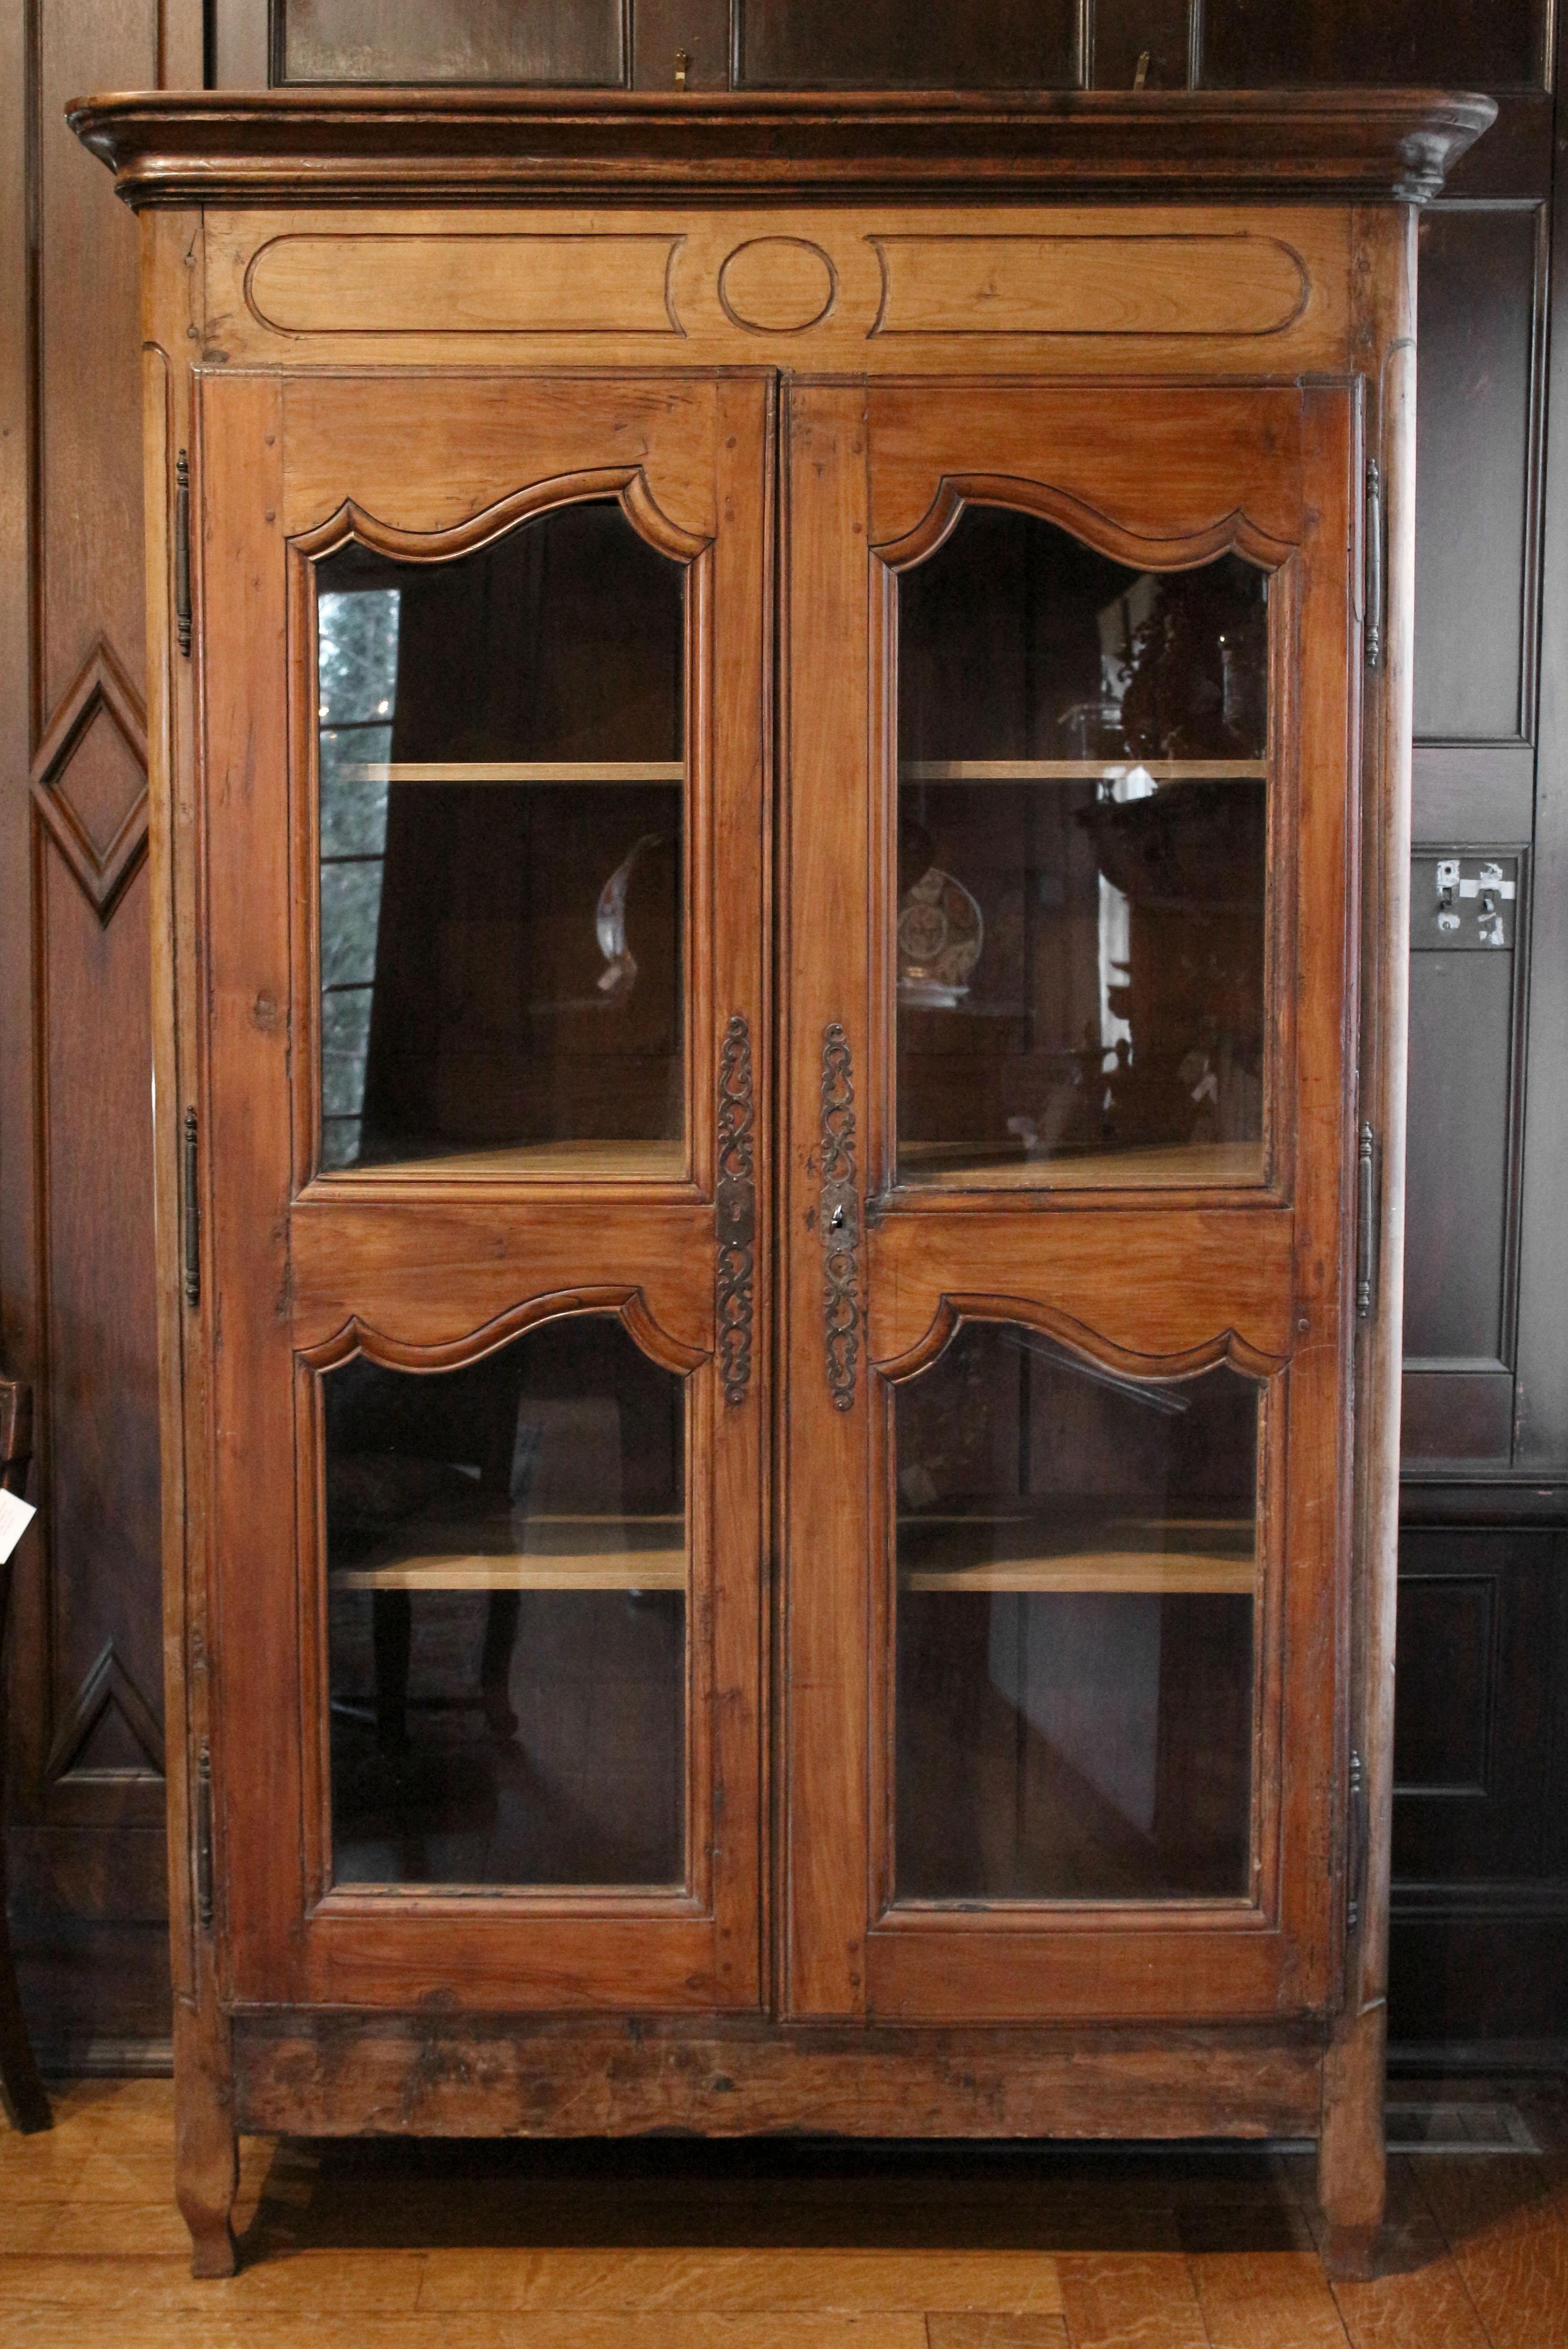 An armoire bibliotheque, Normandy, France, circa 1800. The original wooden door panels replaced with glazing to make it a bibiotheque or display cabinet form. Sides of five floating rectangular panels. Charming in its simplicity. Replaced poplar